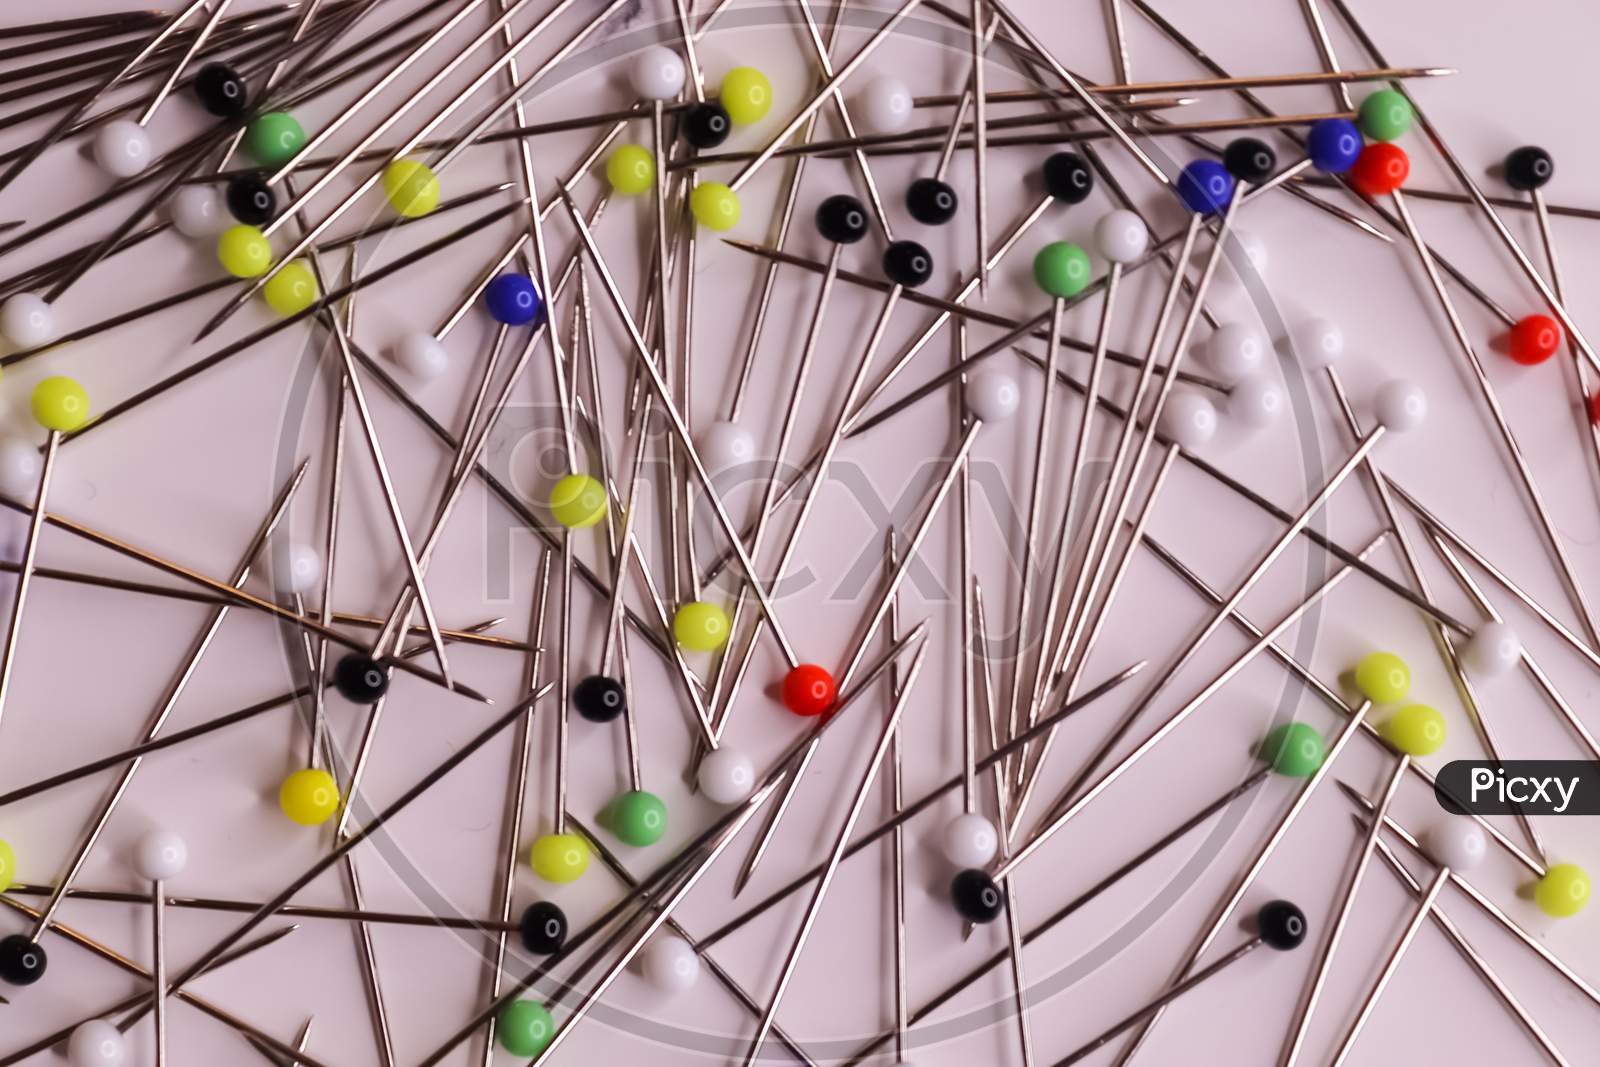 Selective Focus Of Many Pins With Coloured Glass Heads On A White Background.